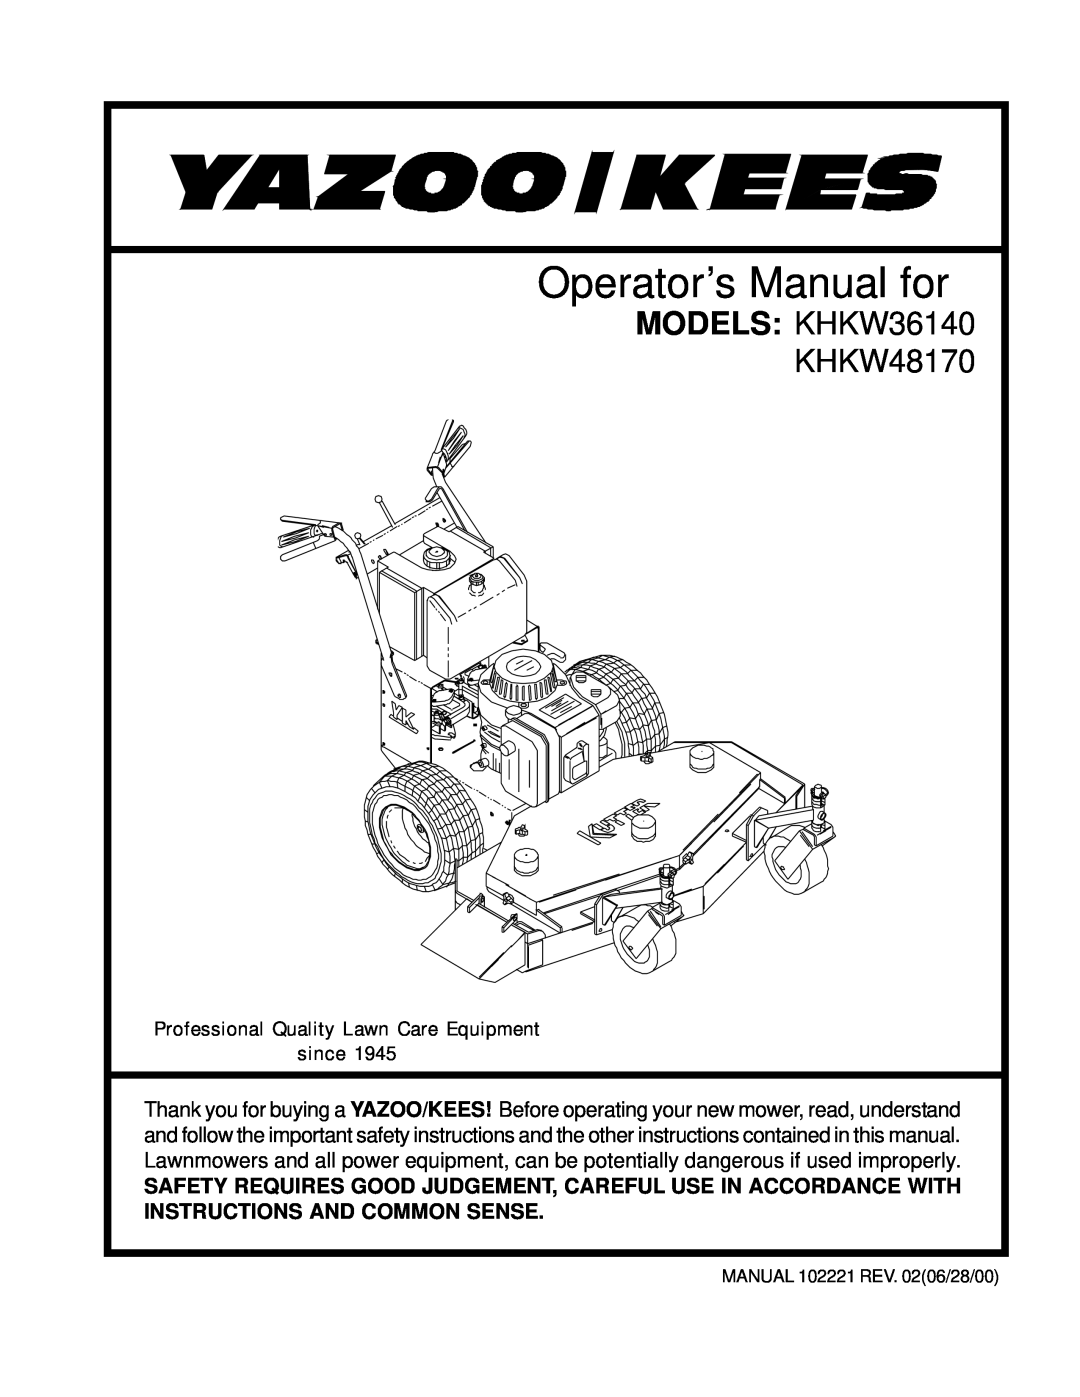 Yazoo/Kees KHKW36140, KHKW48170 important safety instructions Professional Quality Lawn Care Equipment since 